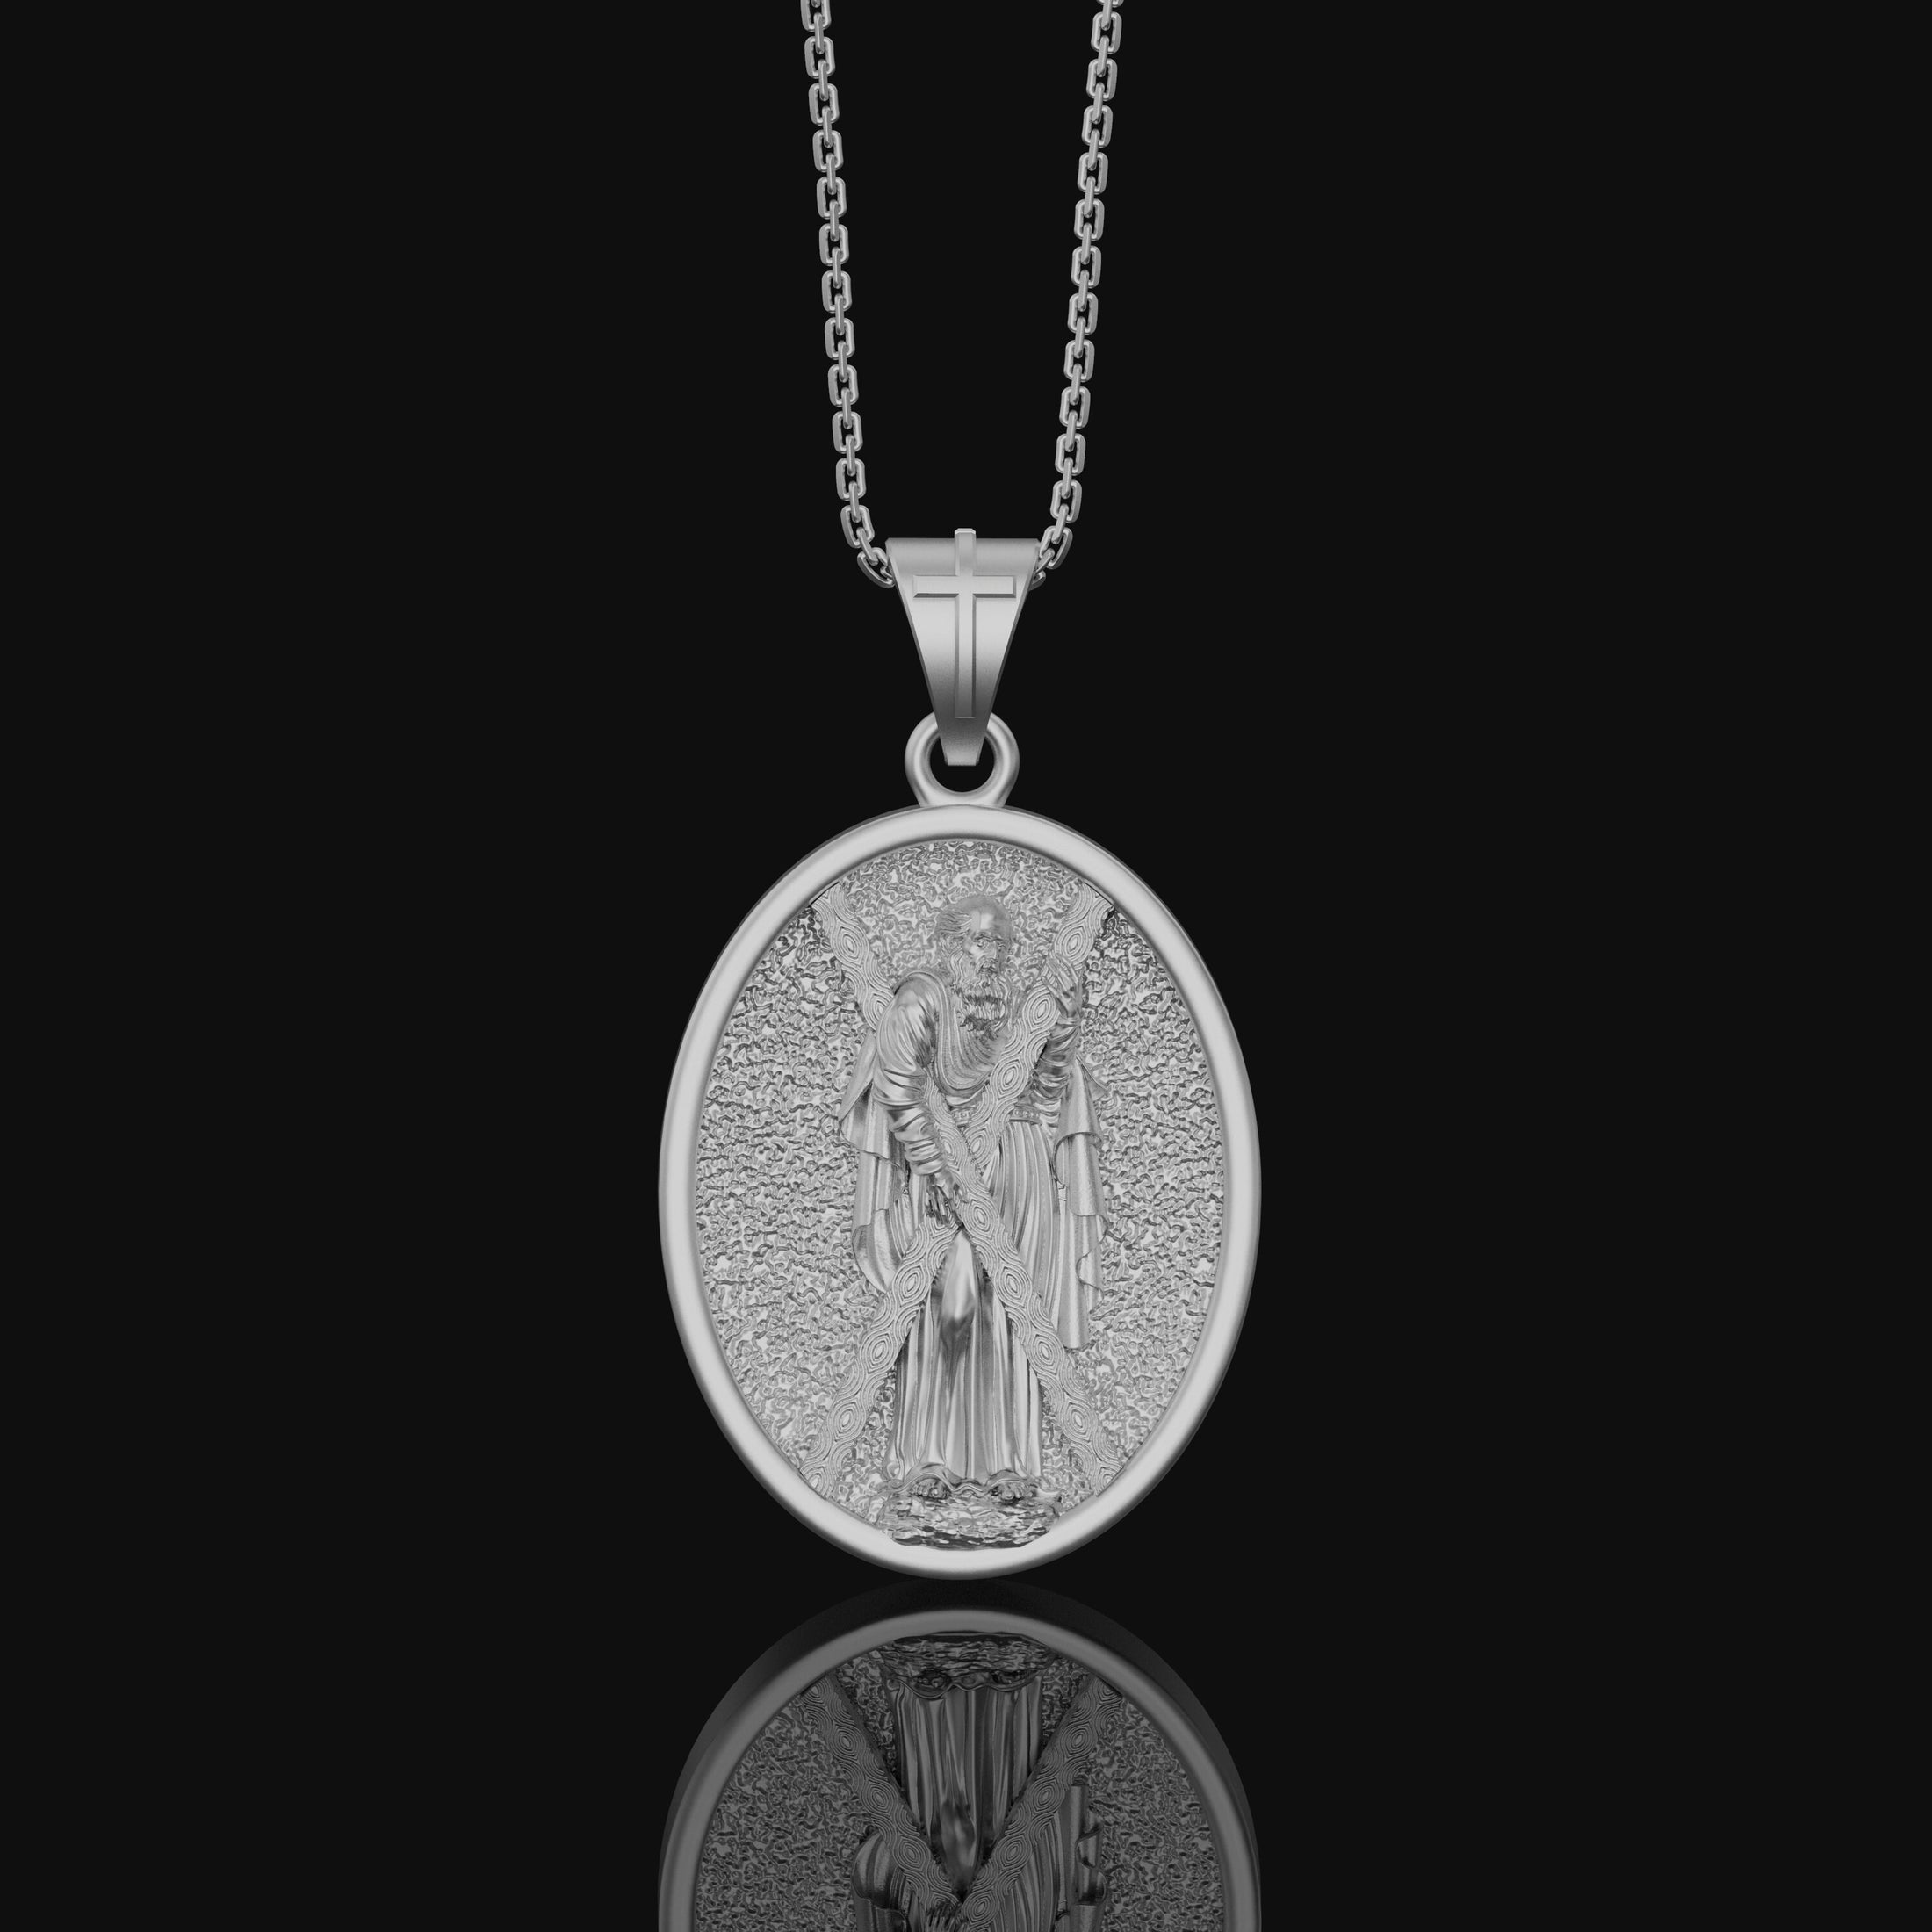 St Andrew Medal, Patron Saint Medal, Andrew The Apostle, Religious Medals Jewelry, Catholic Necklace, Confirmation Gift Polished Finish